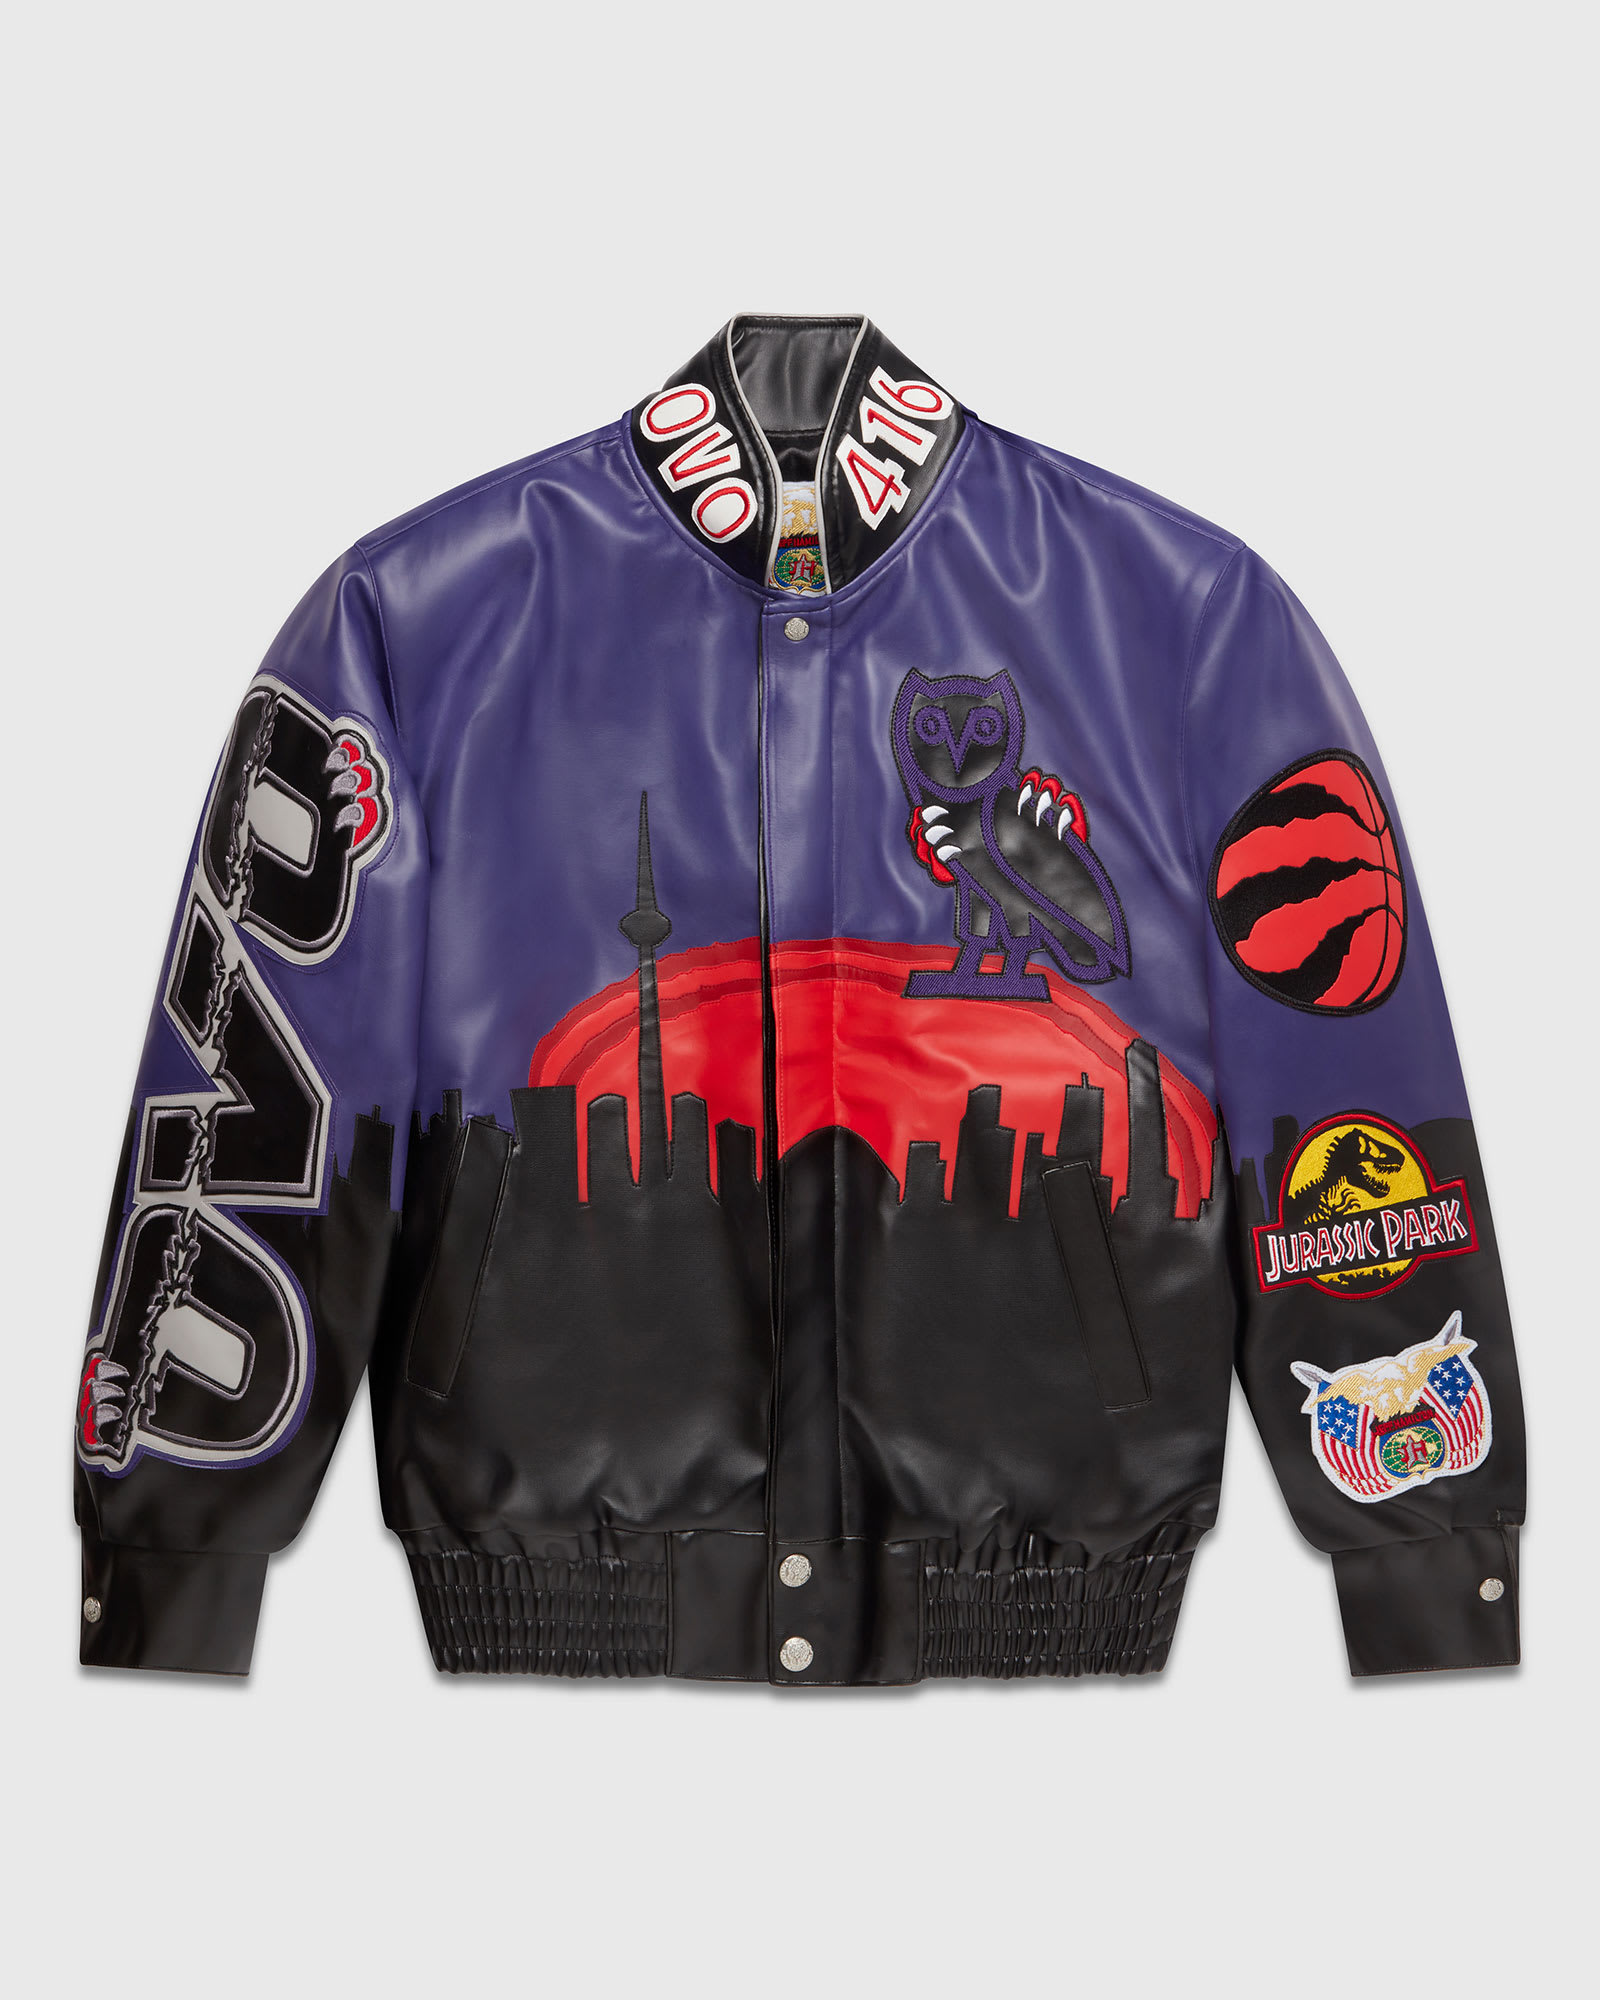 OVO Just Launched A New Collection Of Raptors Gear & It's A Big 90's Vibe  (PHOTOS) - Narcity